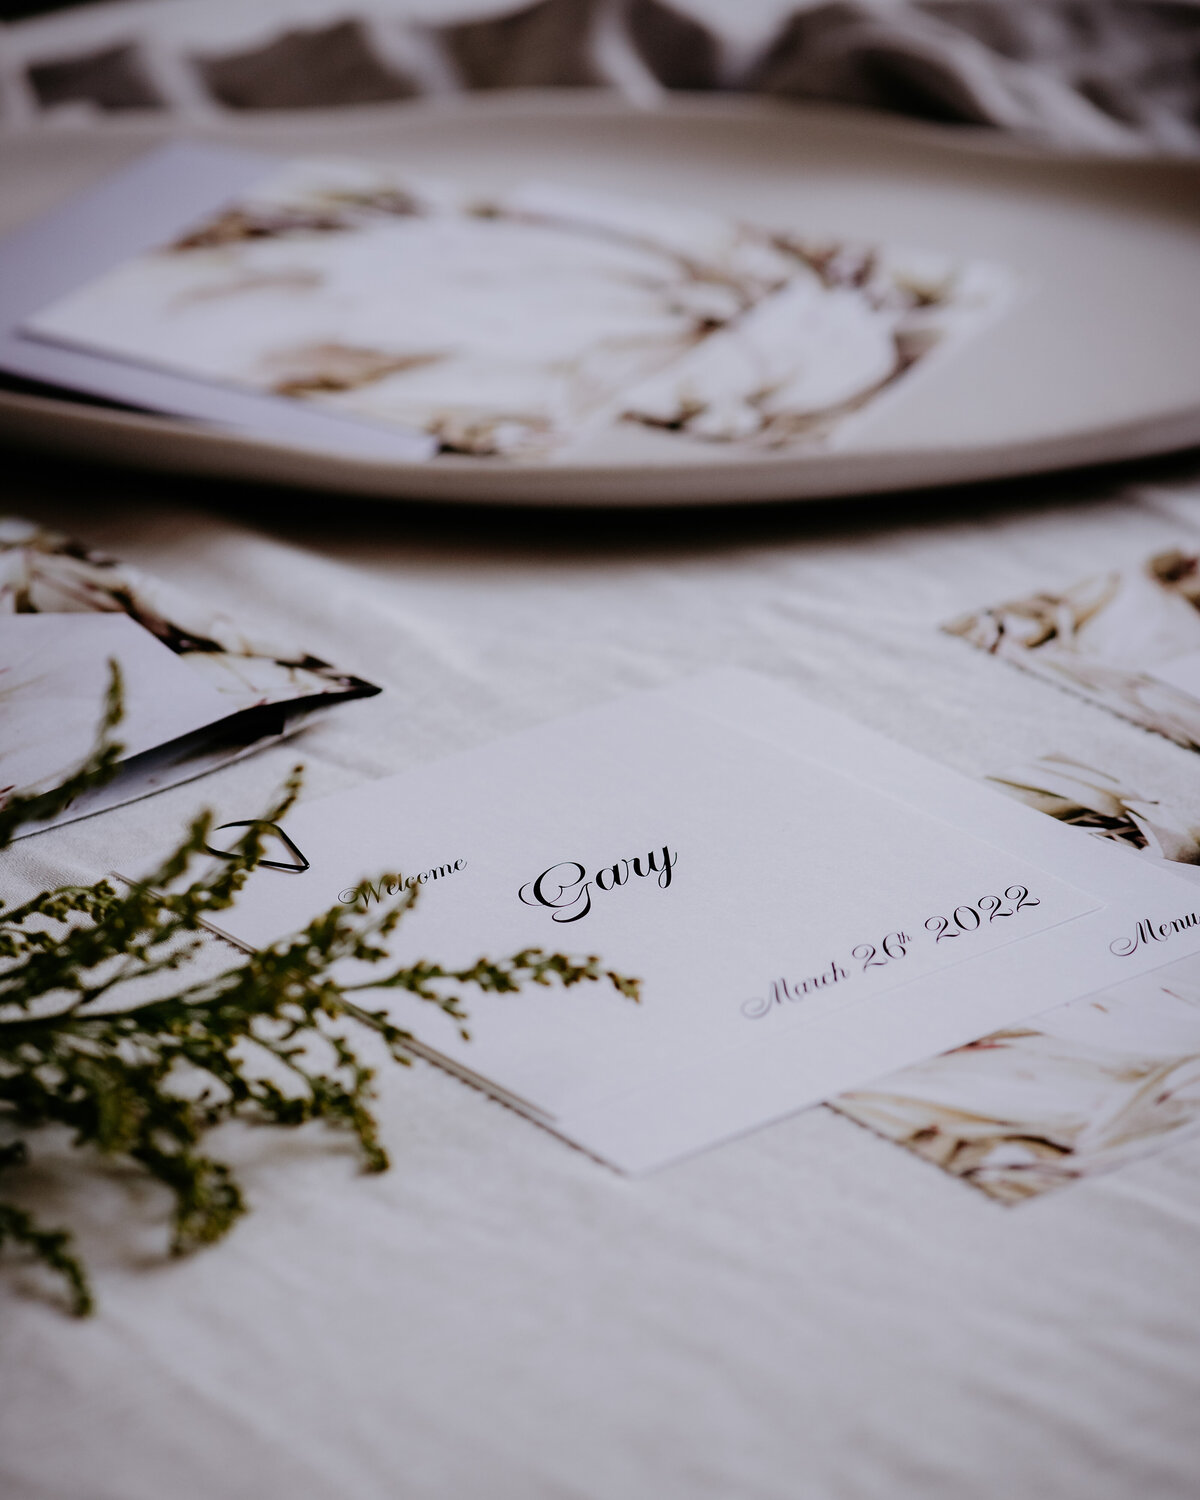 Elegant script font on wedding menu and place card with cream flower image on the back